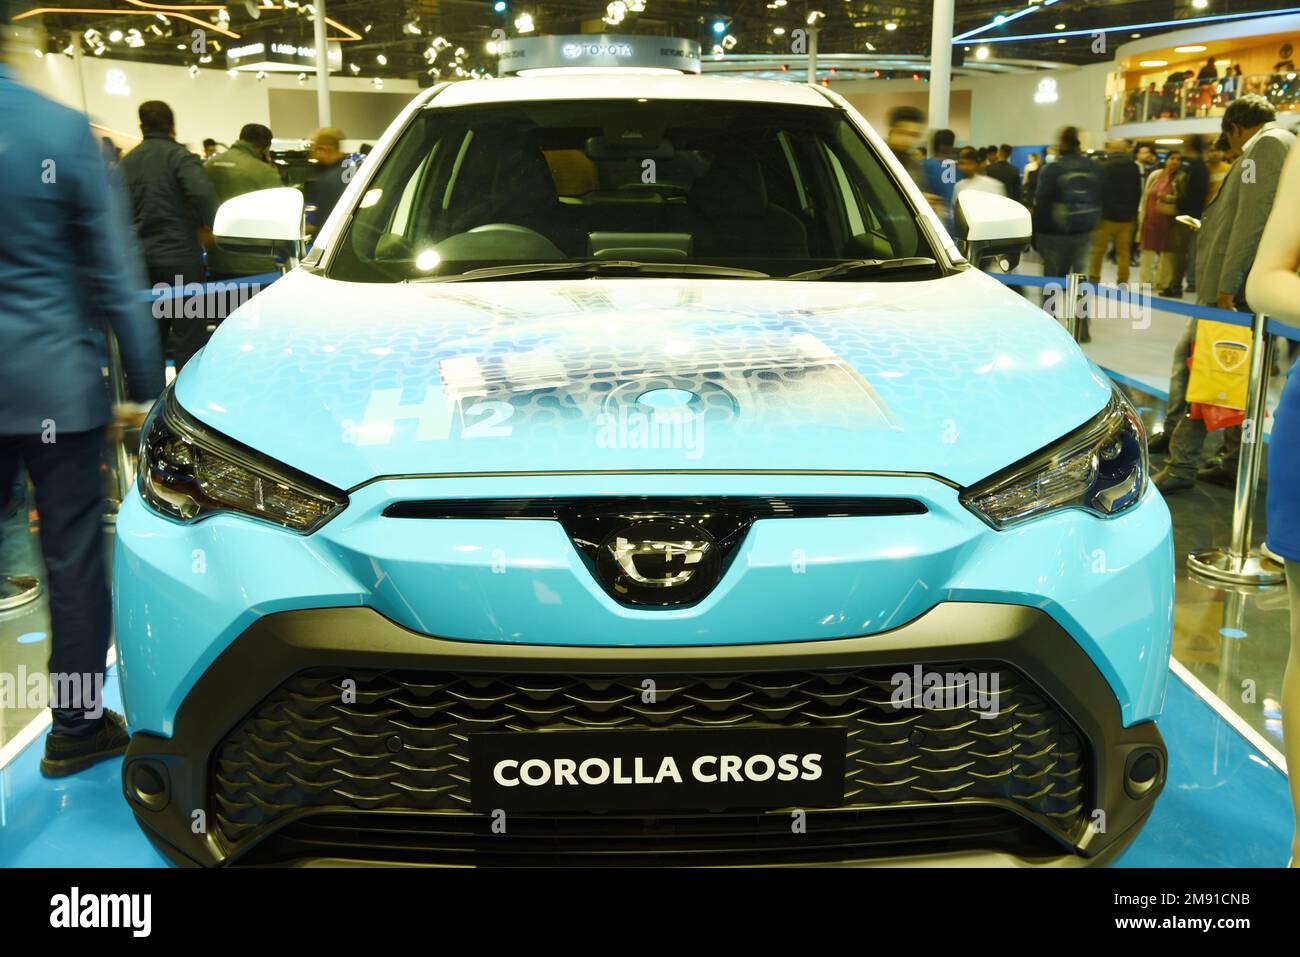 GREATER NOIDA, INDIA - JANUARY 13, 2023: Toyota Corolla Cross H2 Concept car is on display at Auto Expo 2023 car show at India Expo Mart, Greater Noid Stock Photo